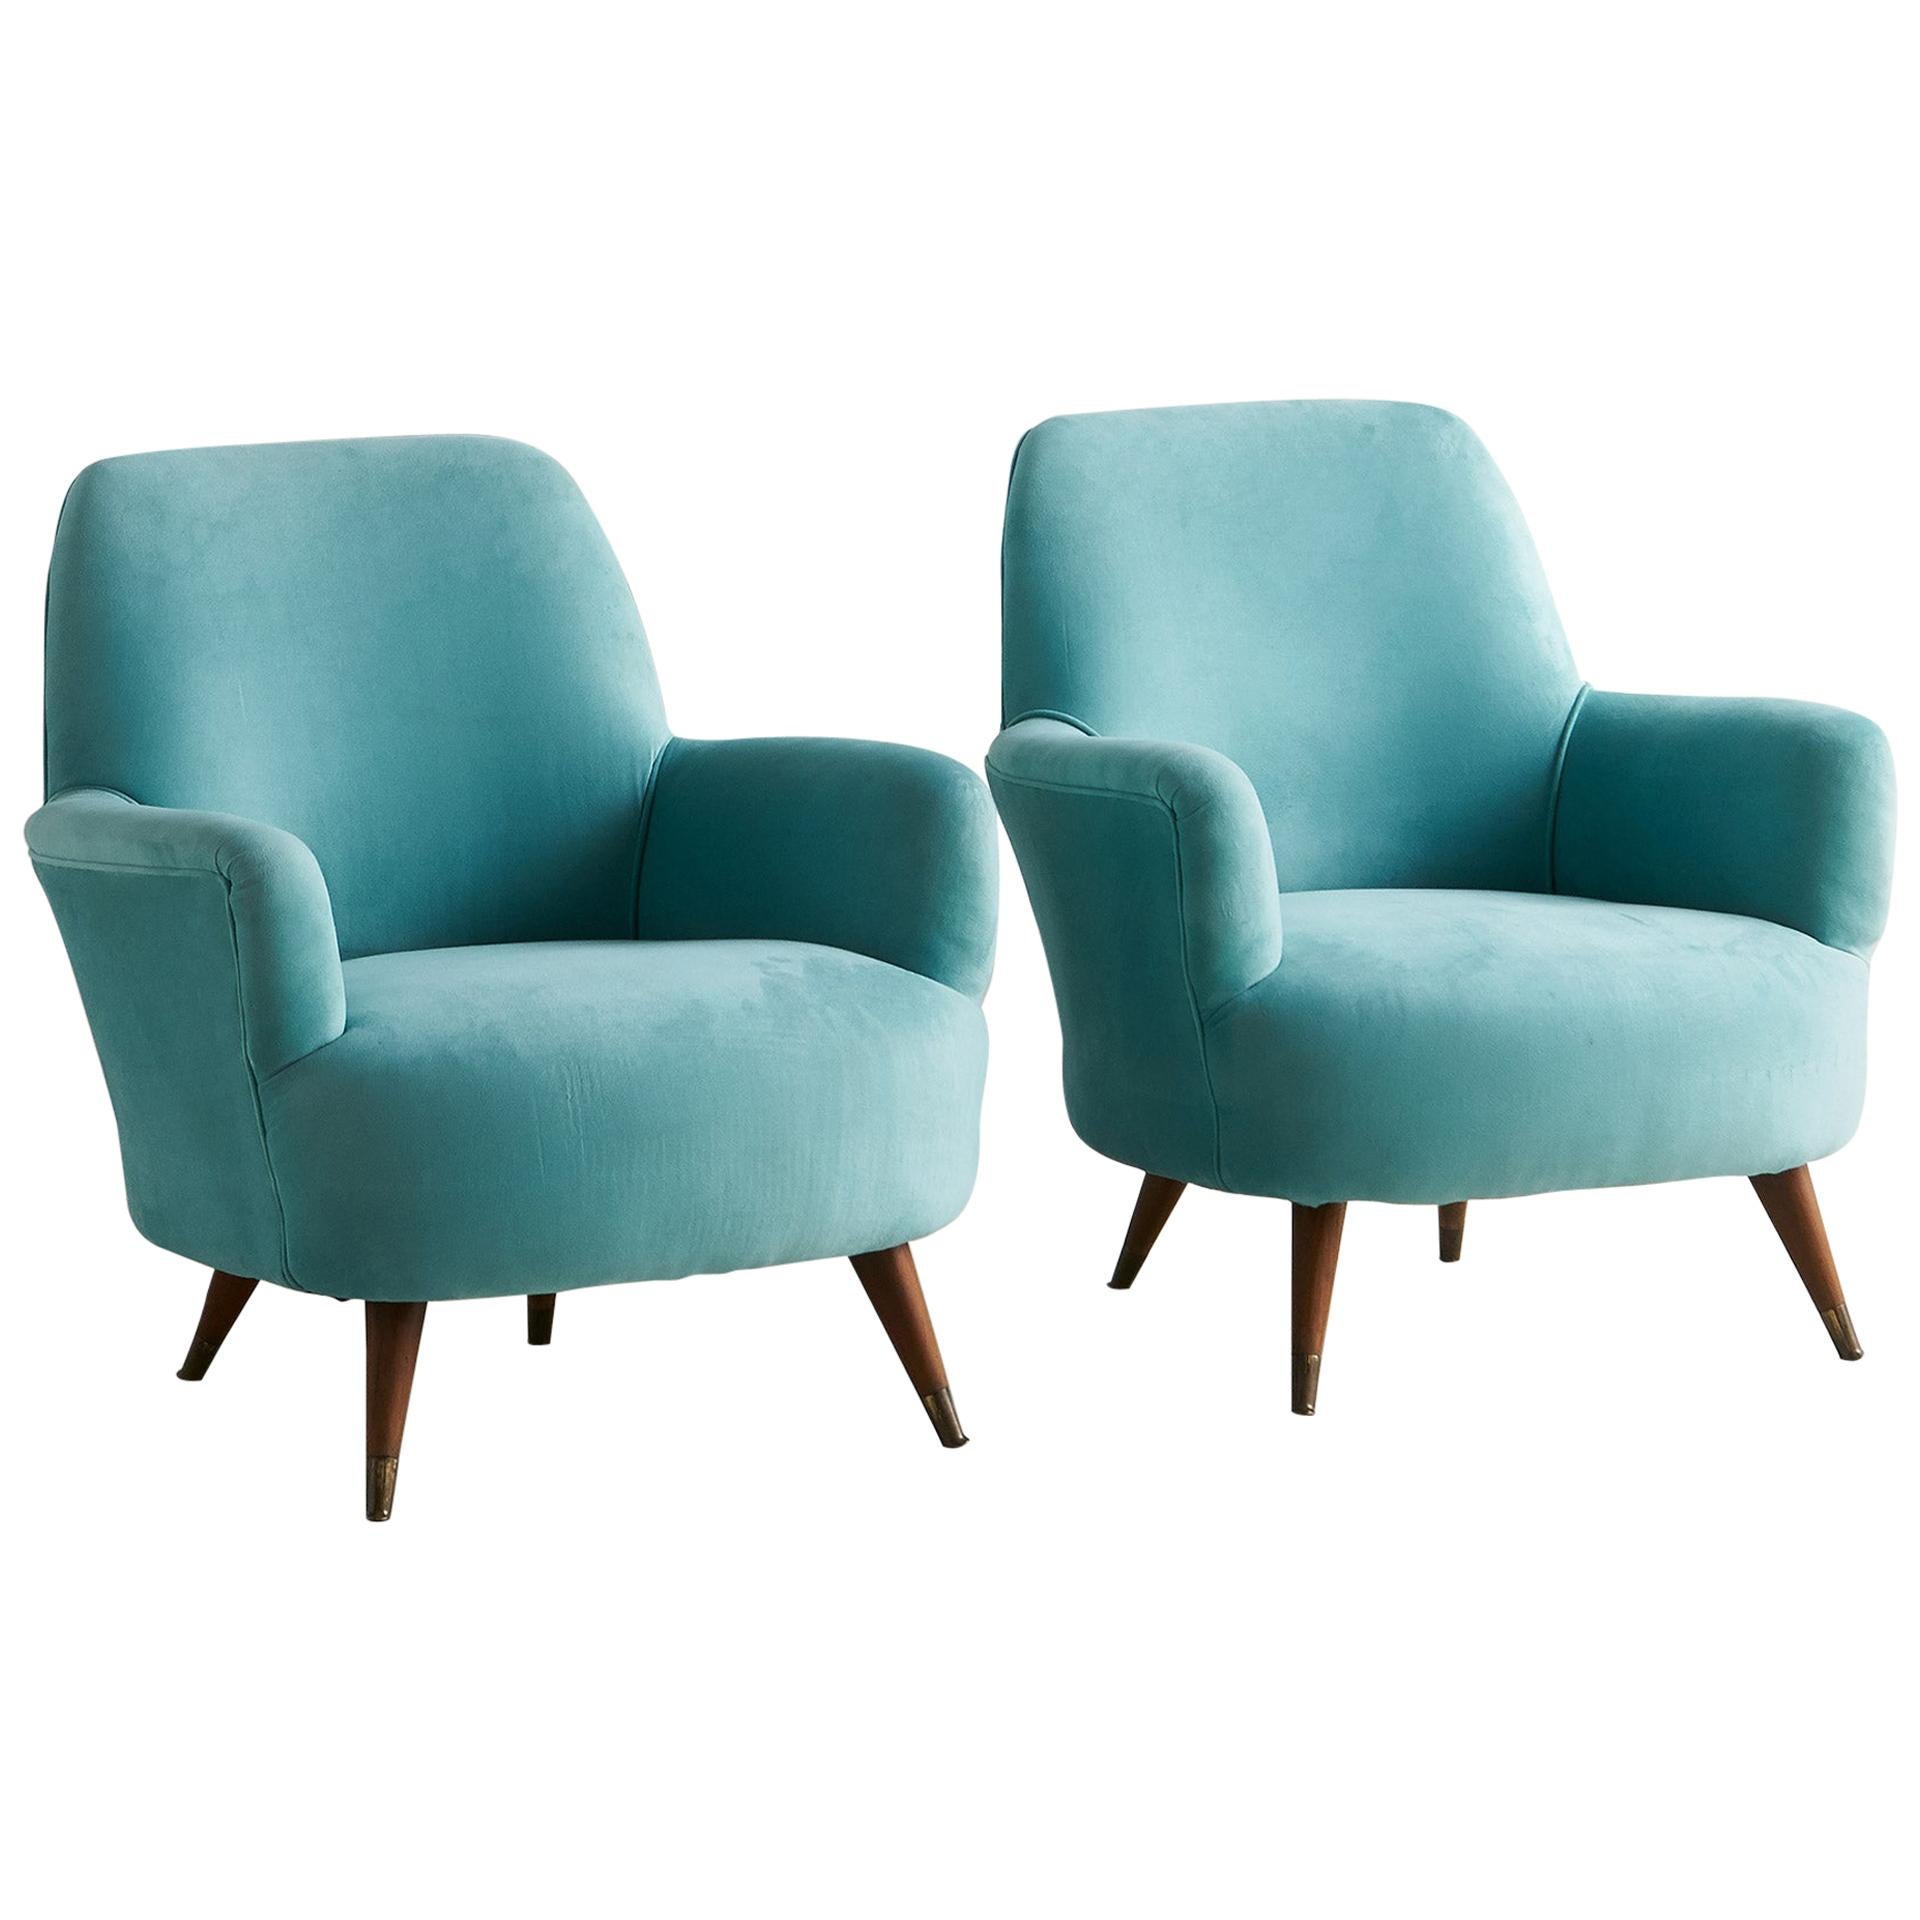 Pair of Upholstered Italian Chairs in Blue